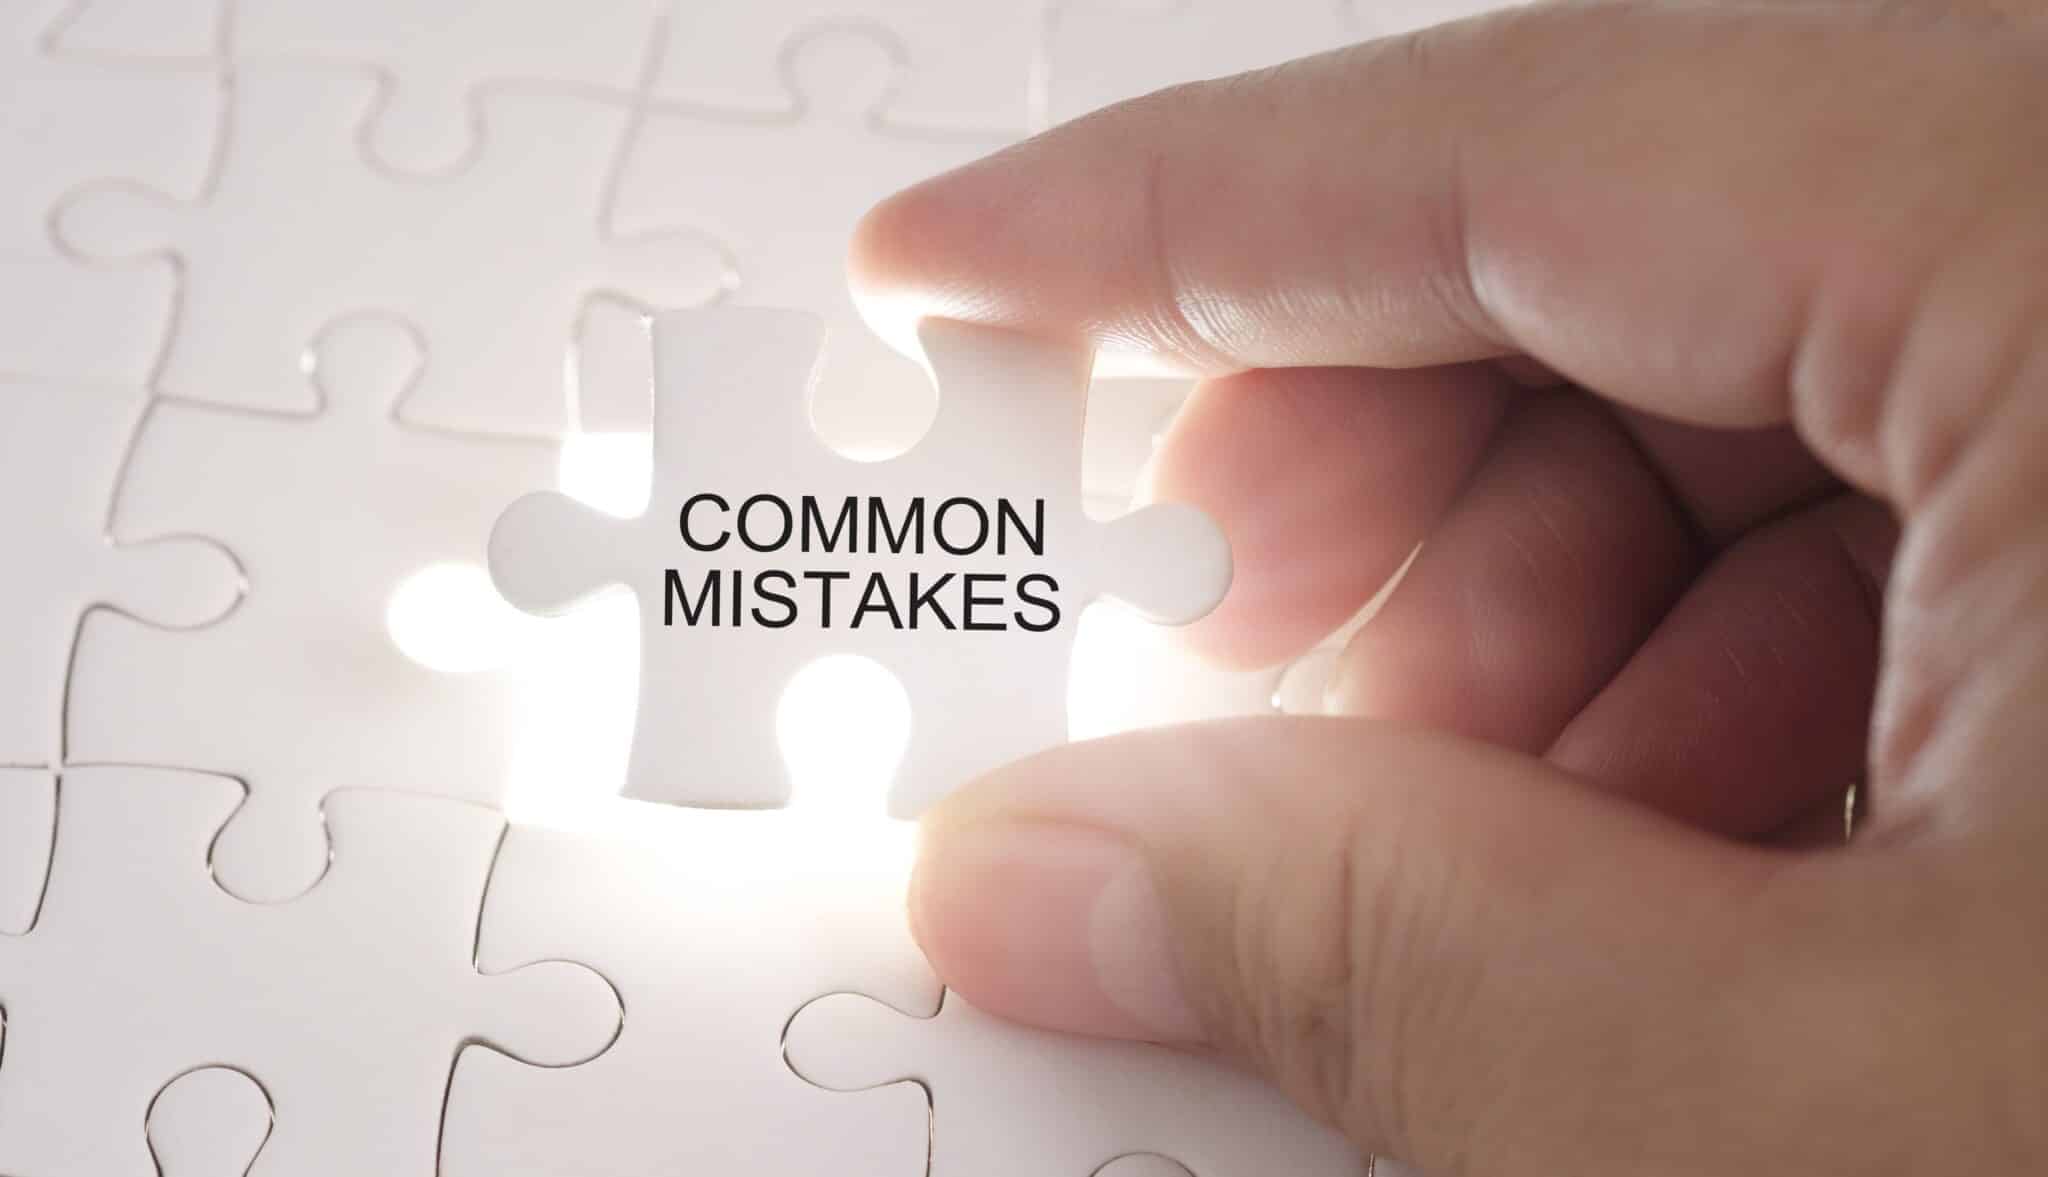 3 Mistakes You Should Avoid While Selecting an Executive Coach